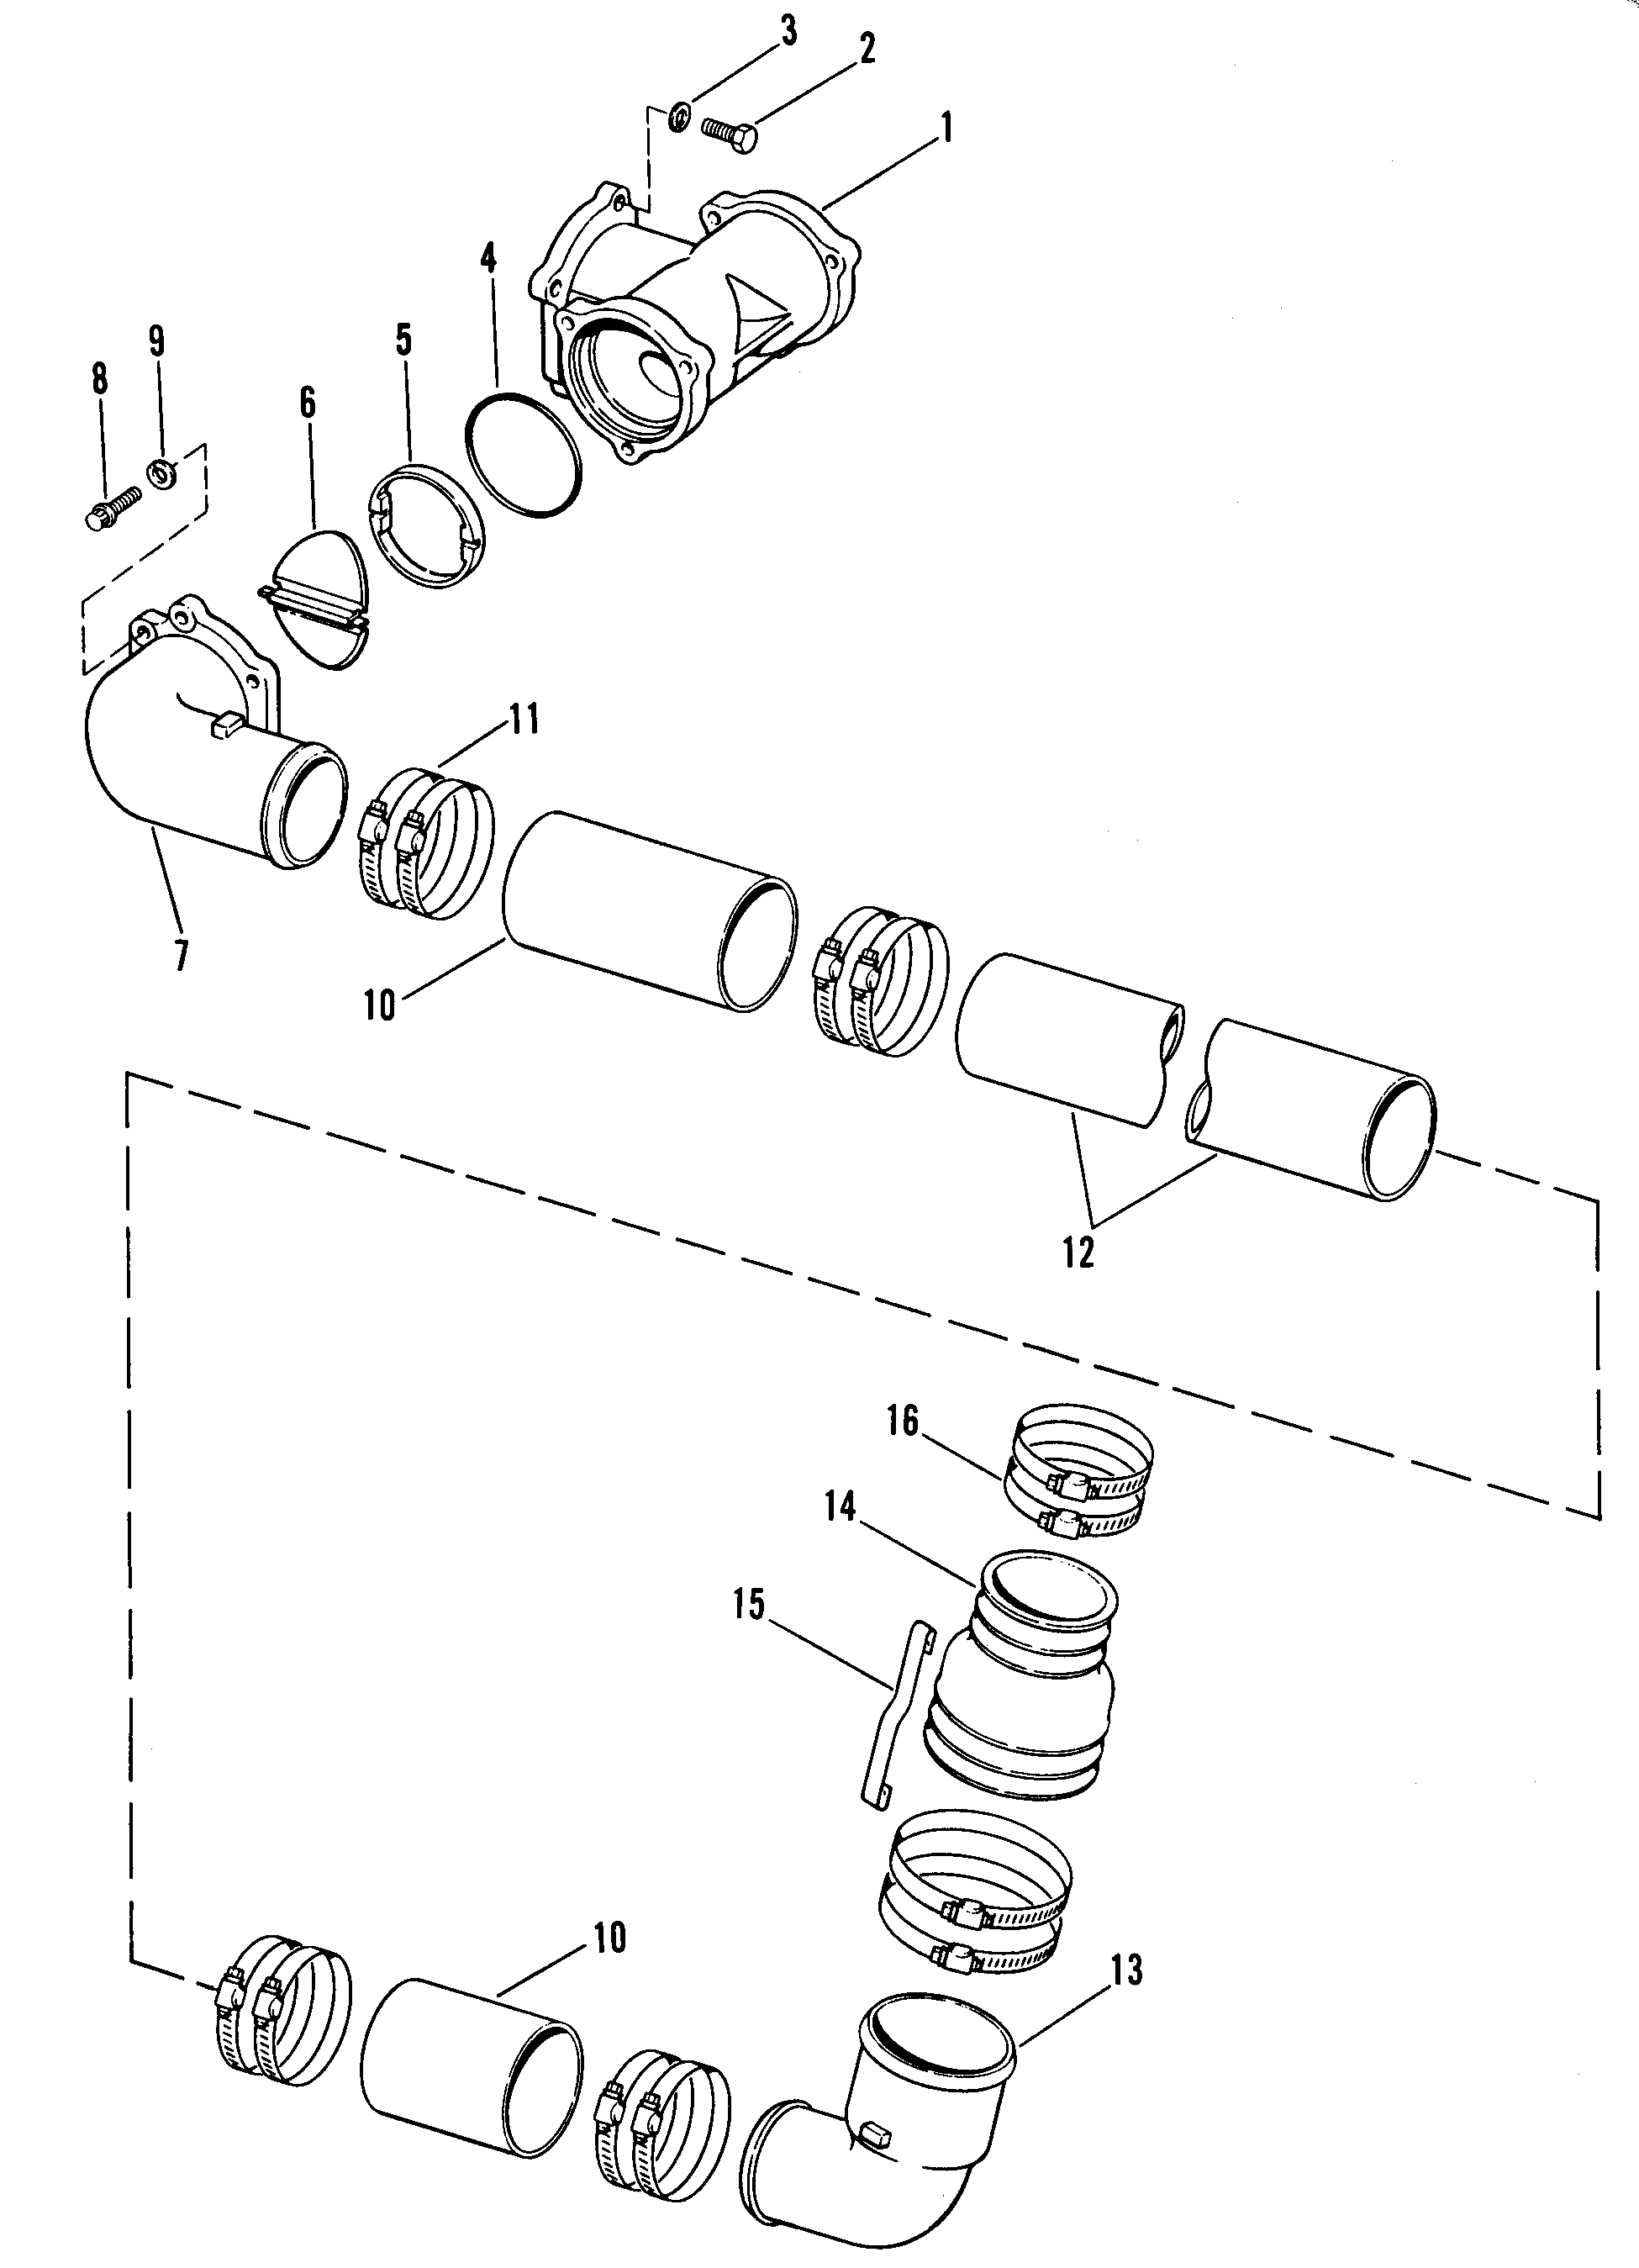 DRIVE SHAFT EXTENSION COMPONENTS (M0059-G8)